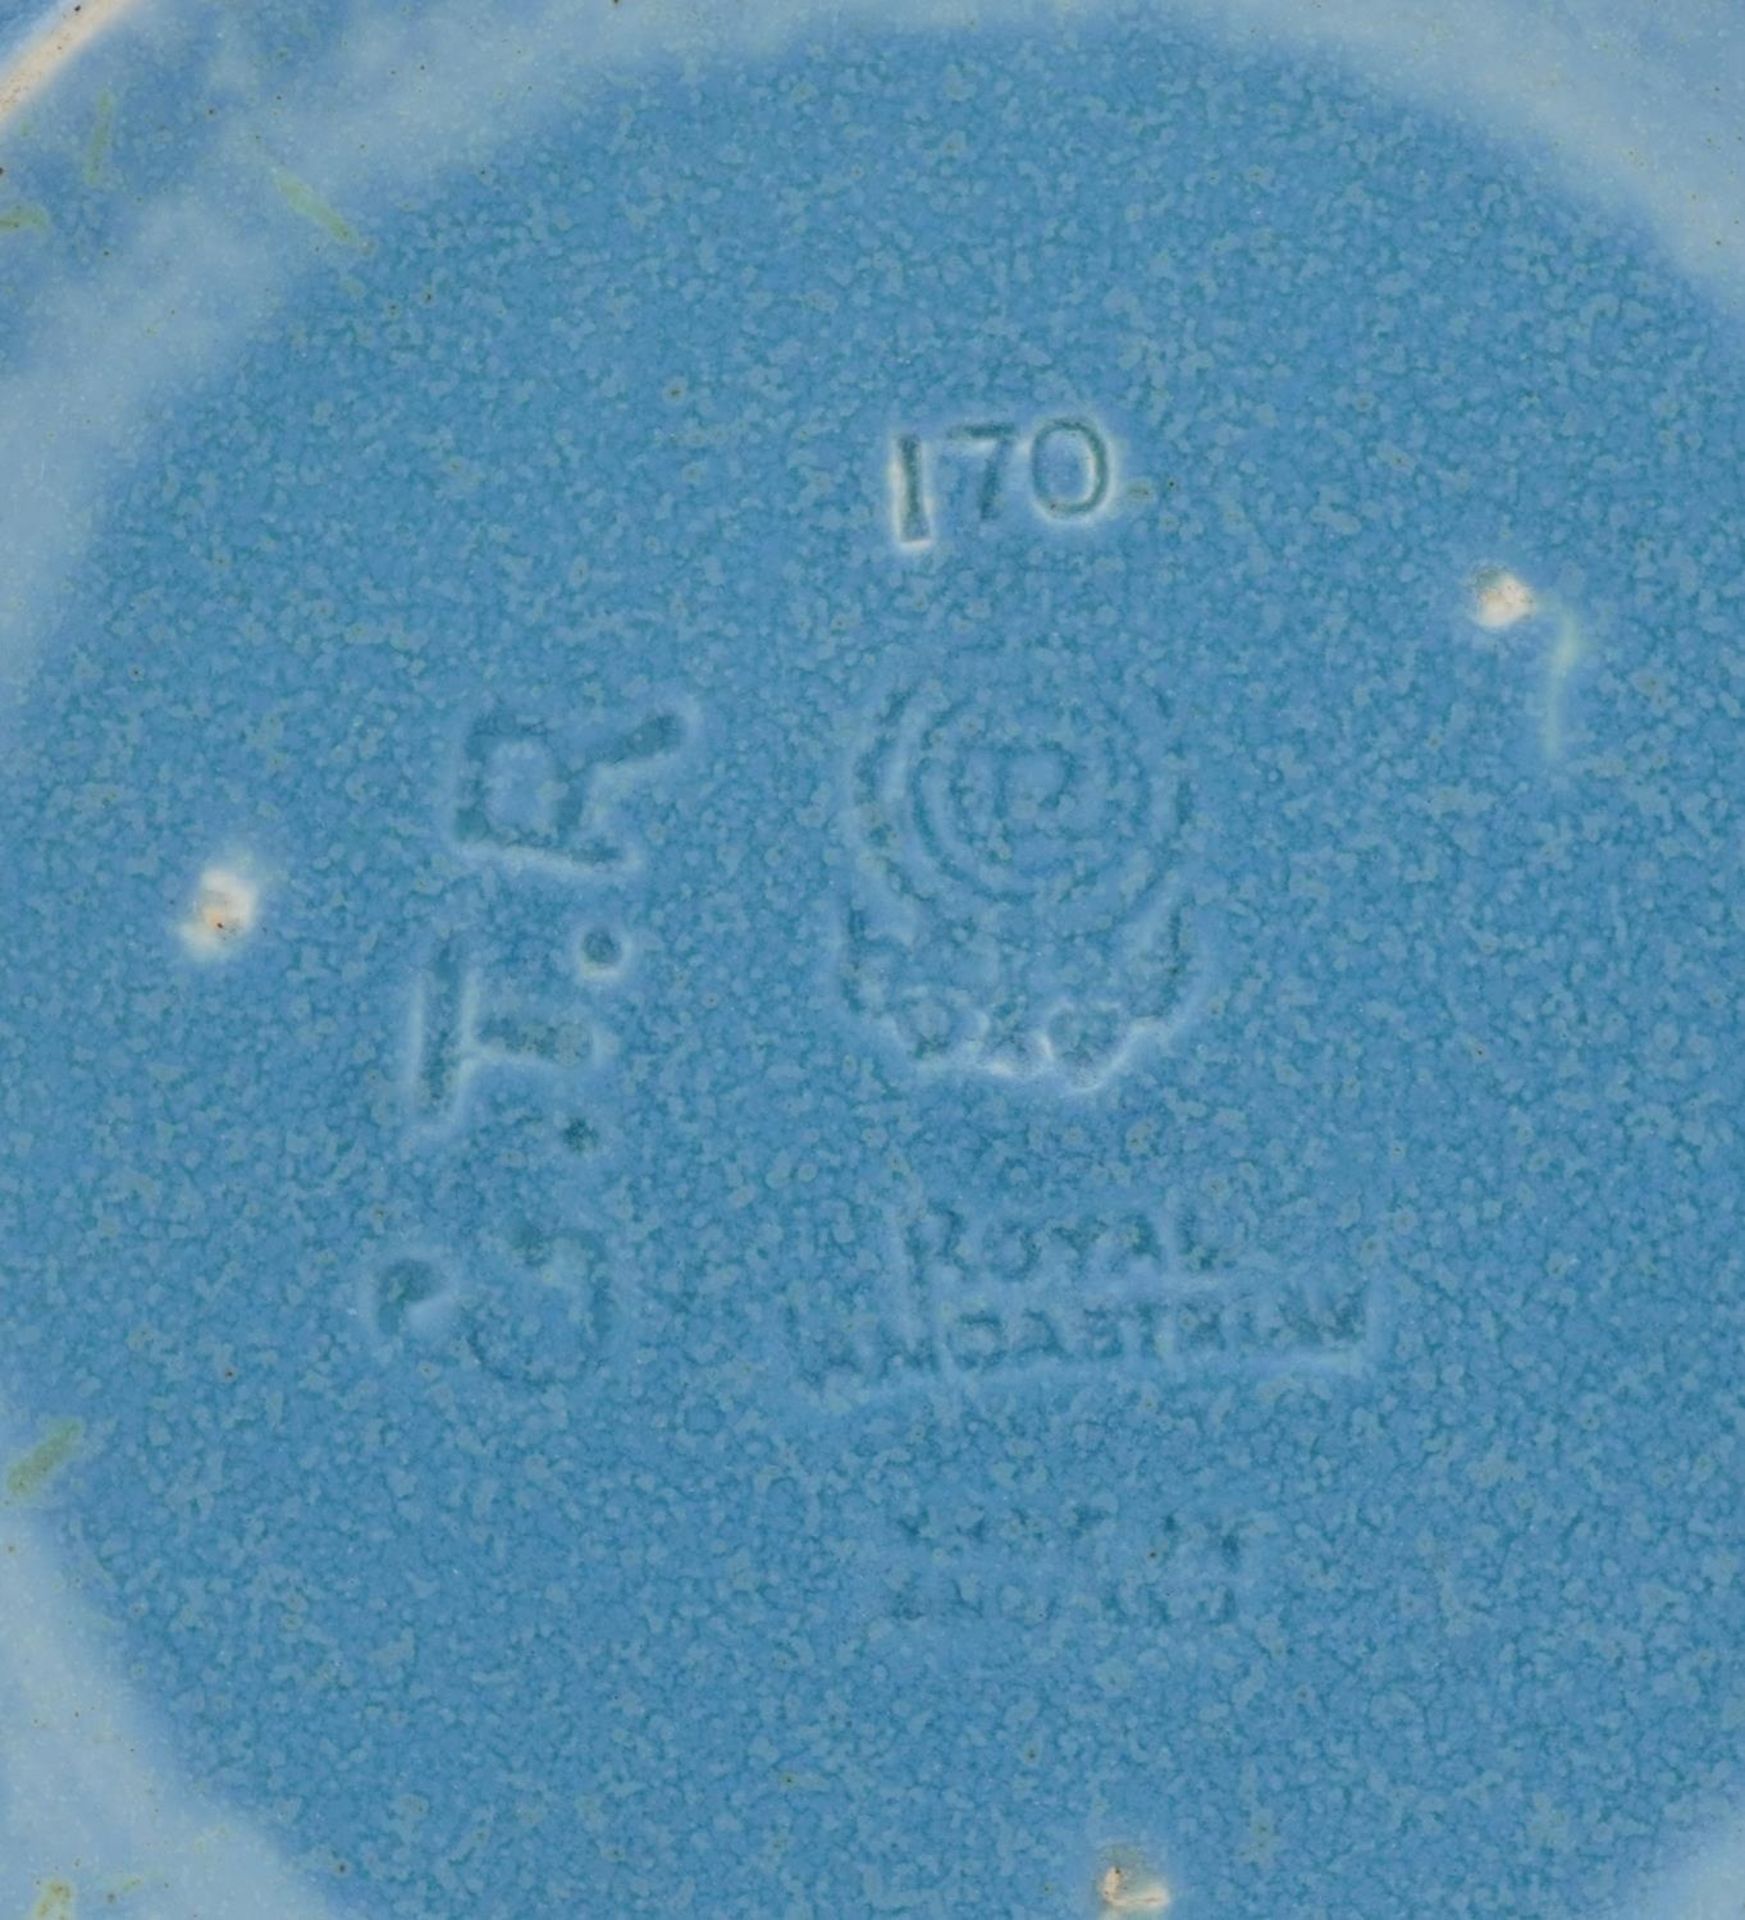 Pilkington's Royal Lancastrian bowl having a mottled blue glaze, initials E T R and numbered 170 - Image 4 of 4